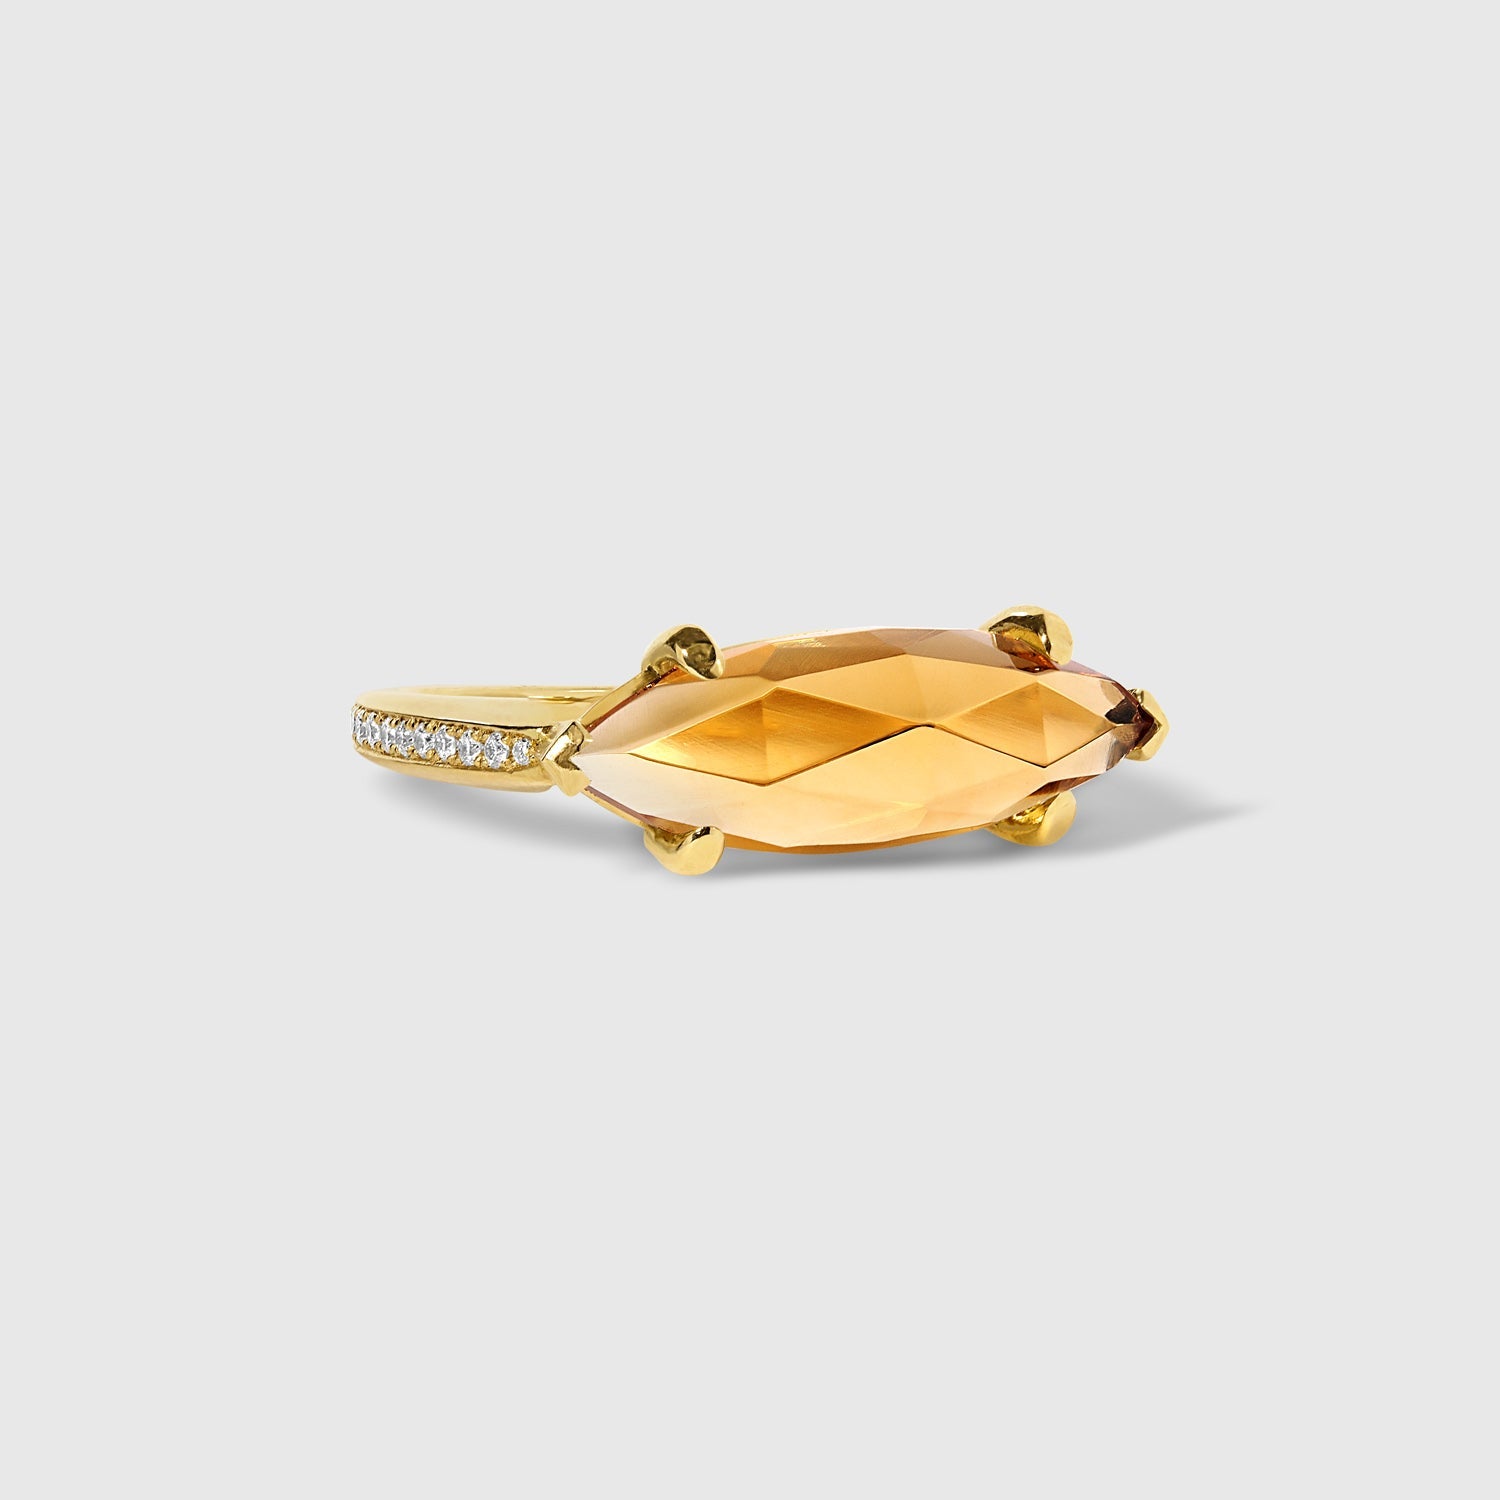 Citrine & White Diamonds - Marquise Ring in Solid Gold – Sunset Glow Set - Aurora Laffite Jewelry